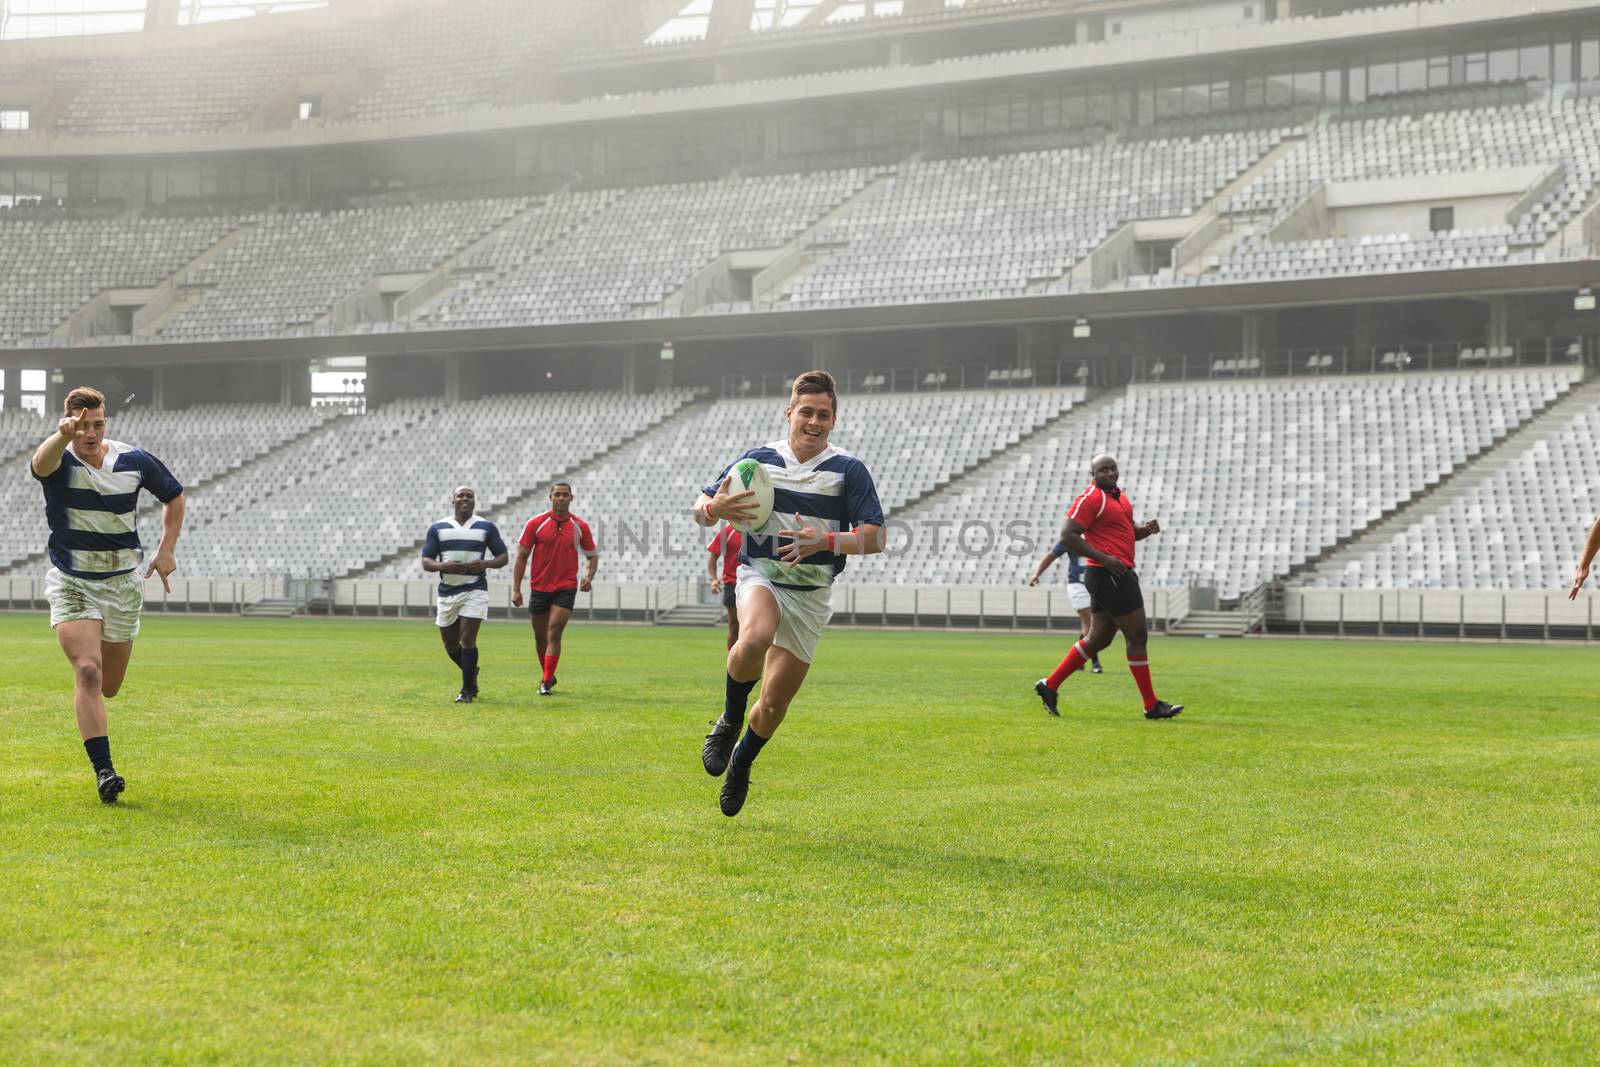 Group of diverse male rugby players playing rugby in stadium by Wavebreakmedia